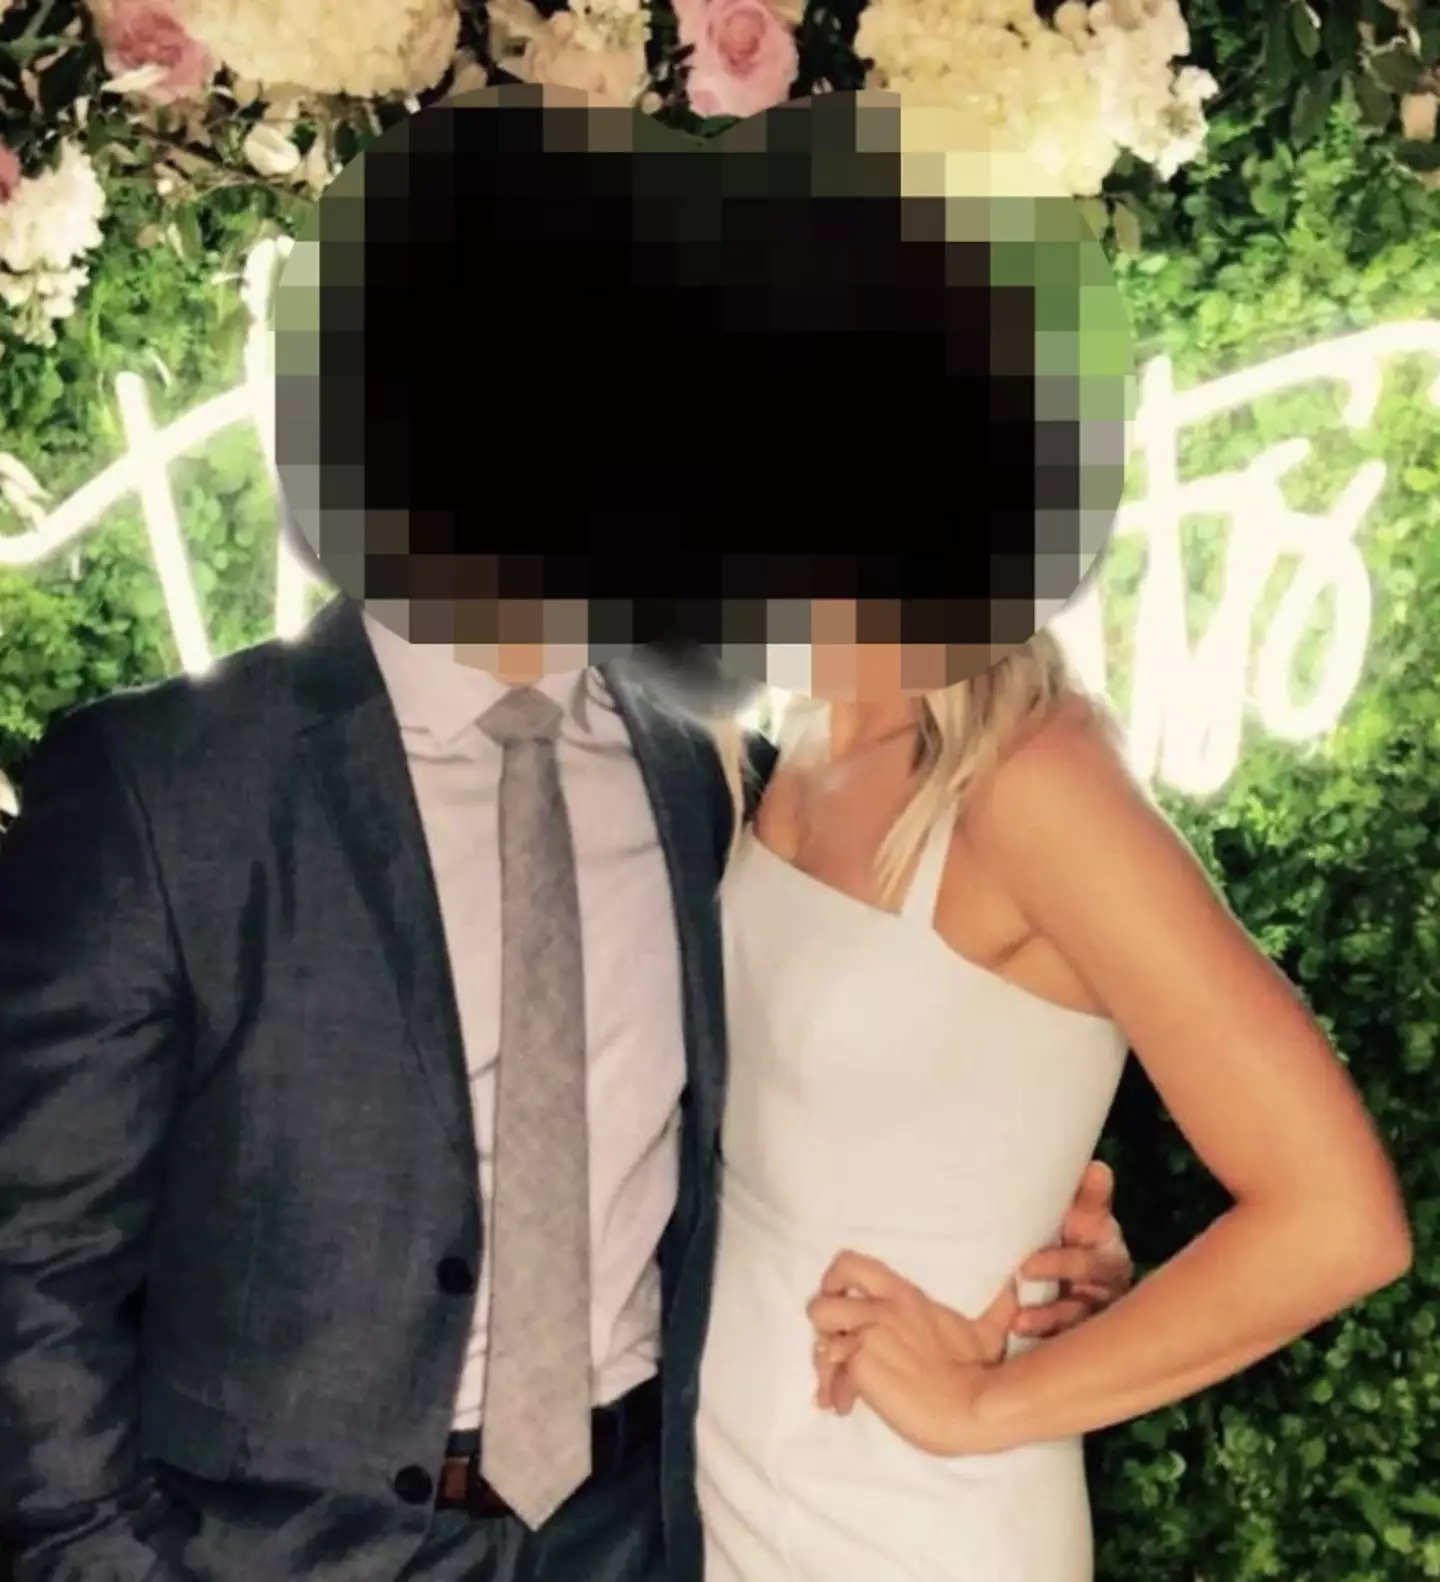 A wedding guest decided to wear a white dress to the ceremony (